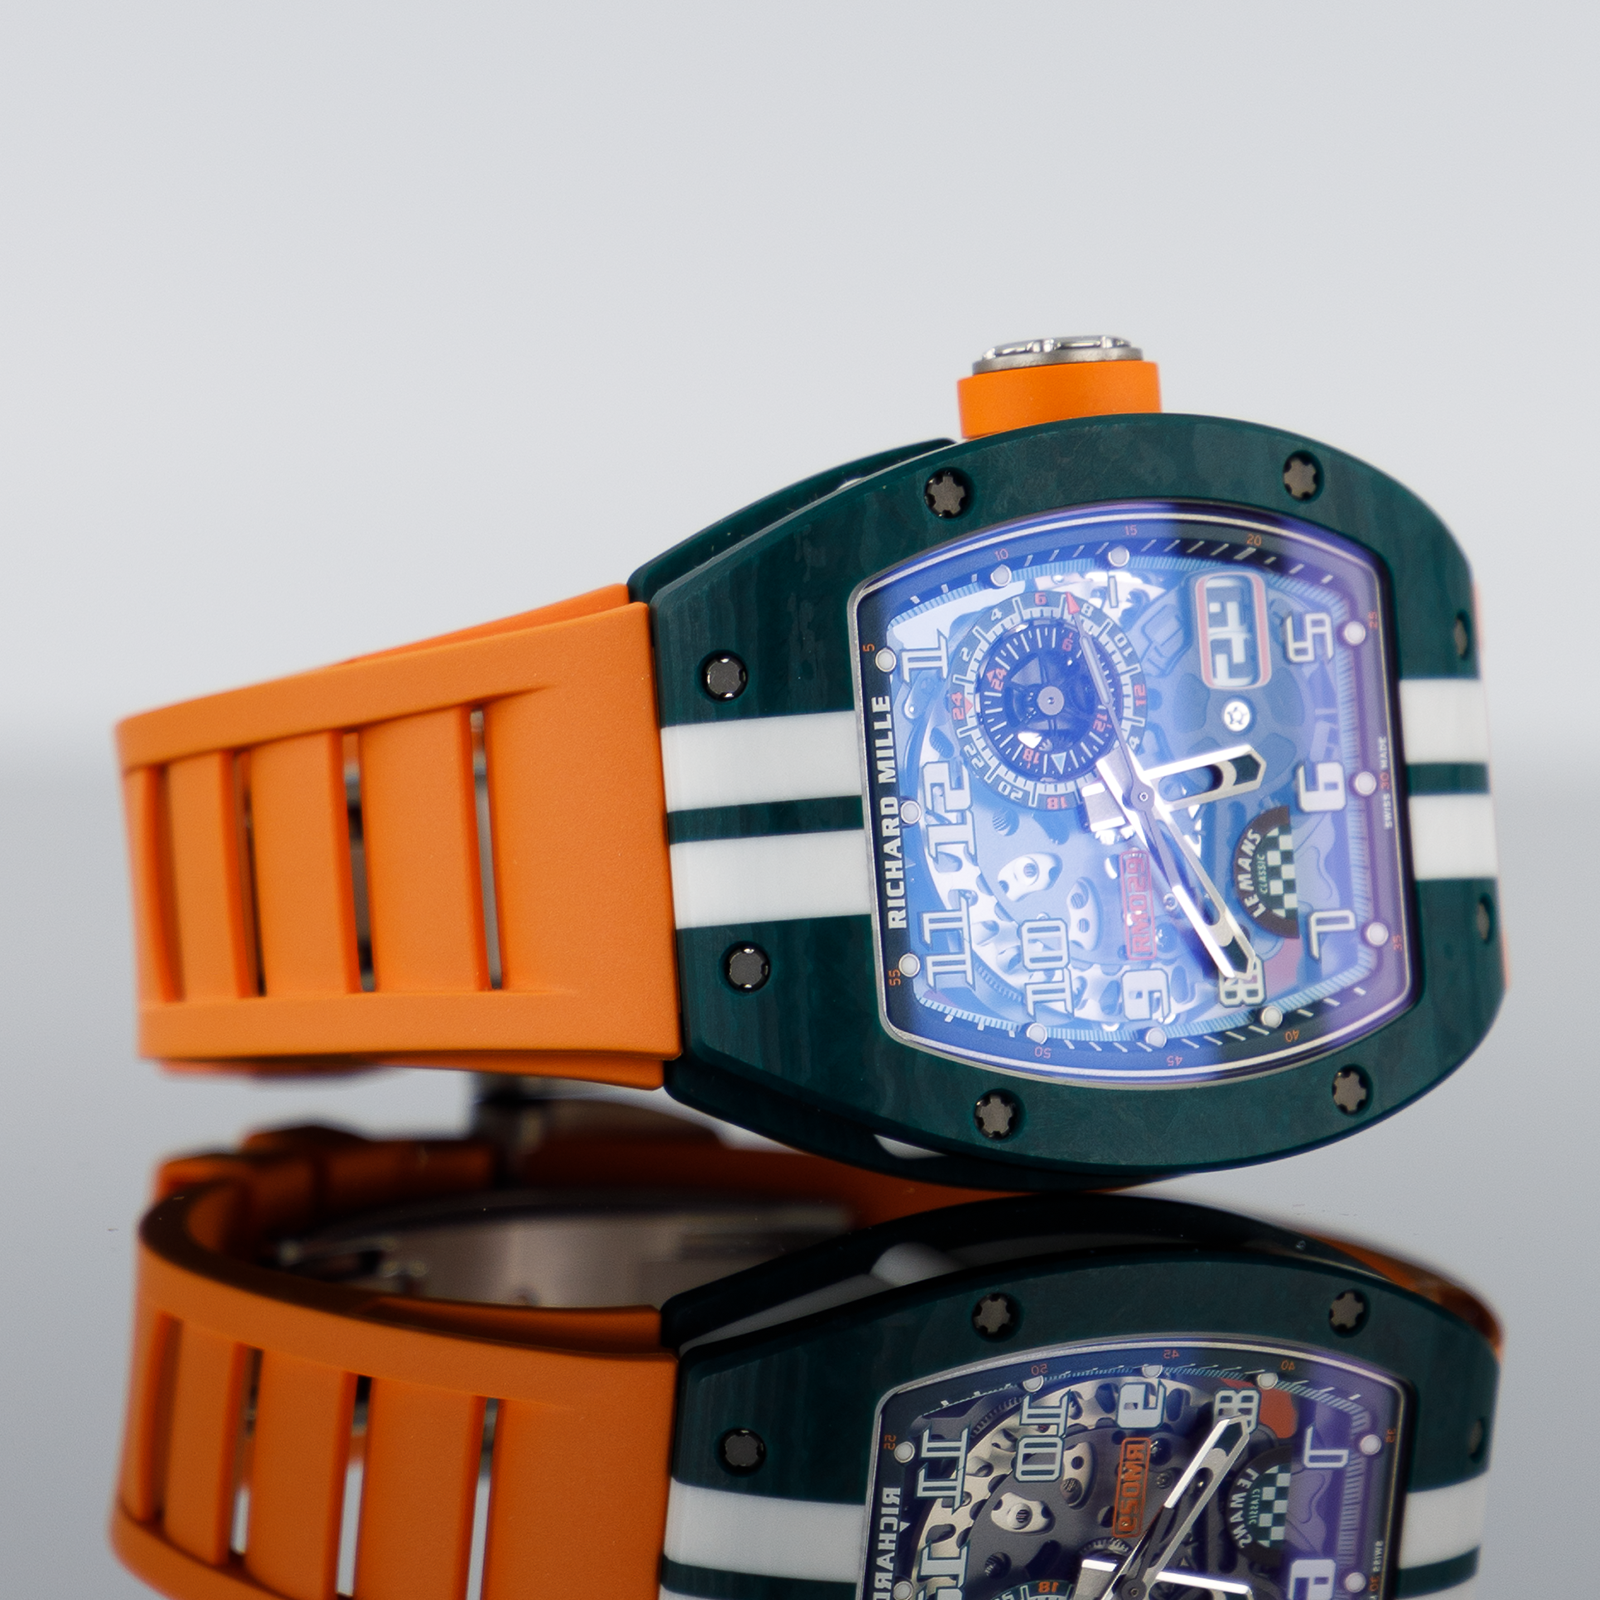 Richard Mille RM029 Fq Green And White Le Mans Classic Automatic Winding Limited Edition 40.10Mm X 48.15Mm White Rubber Straps